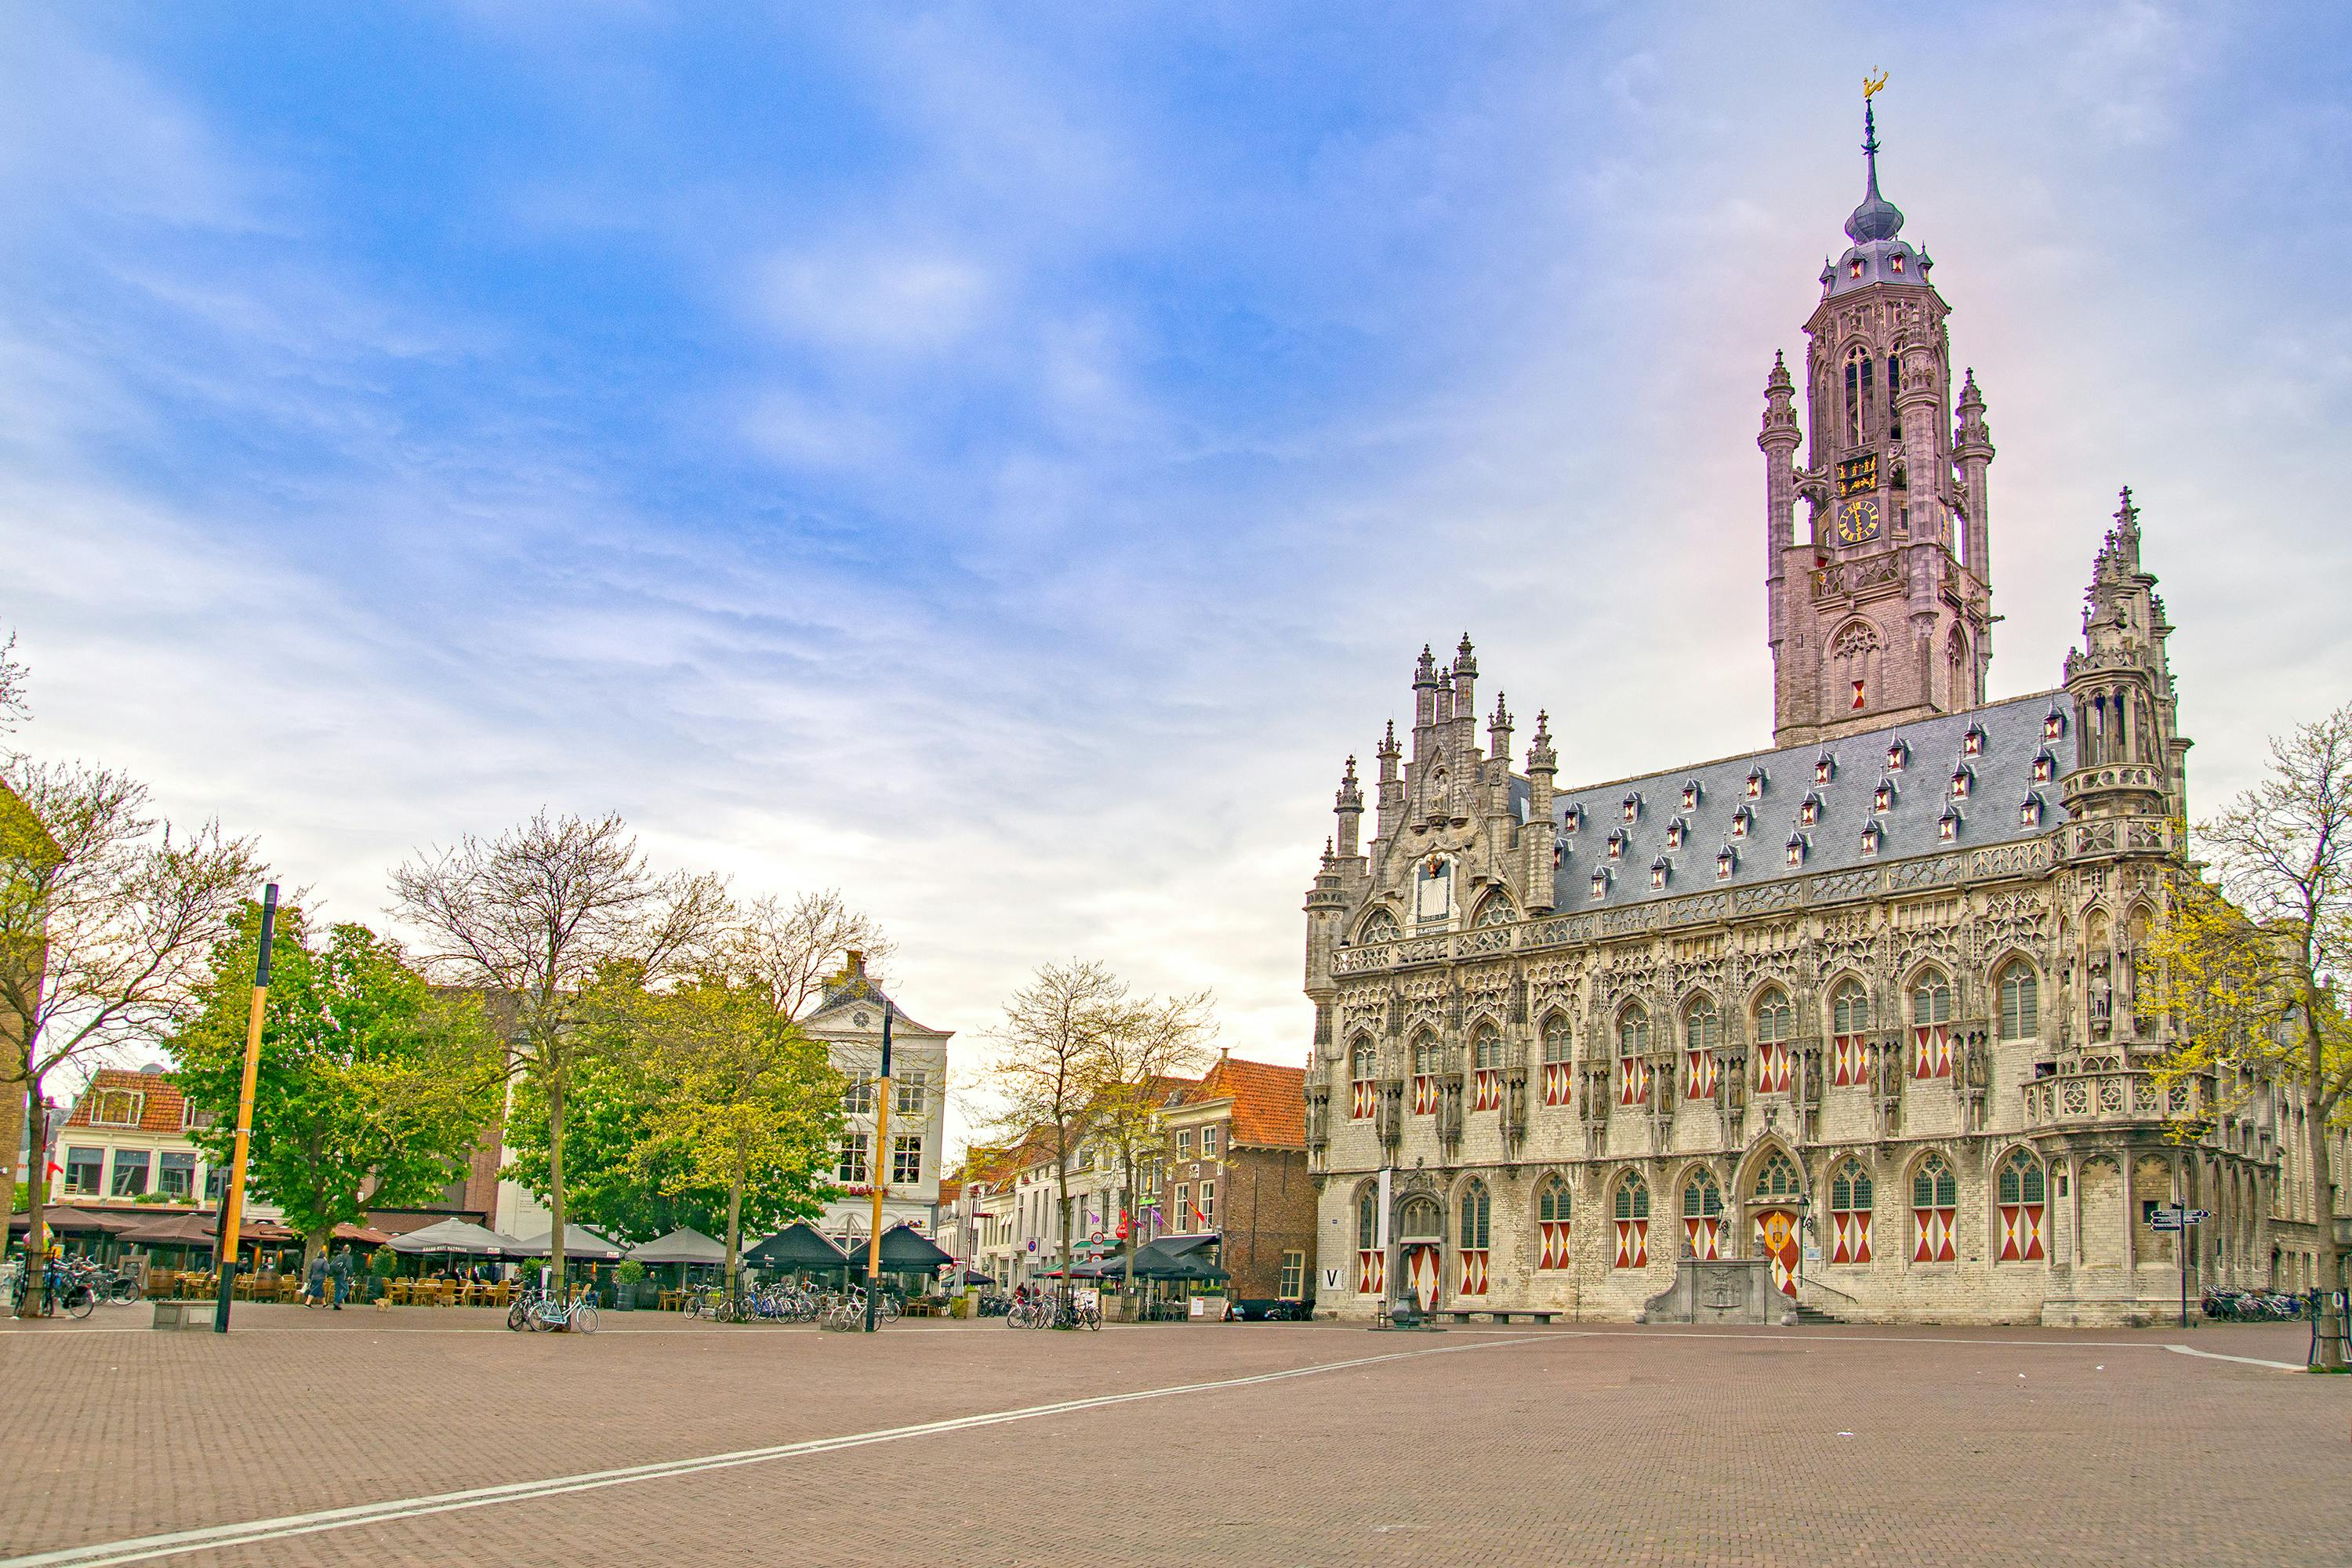 Self guided tour with interactive city game of Middelburg